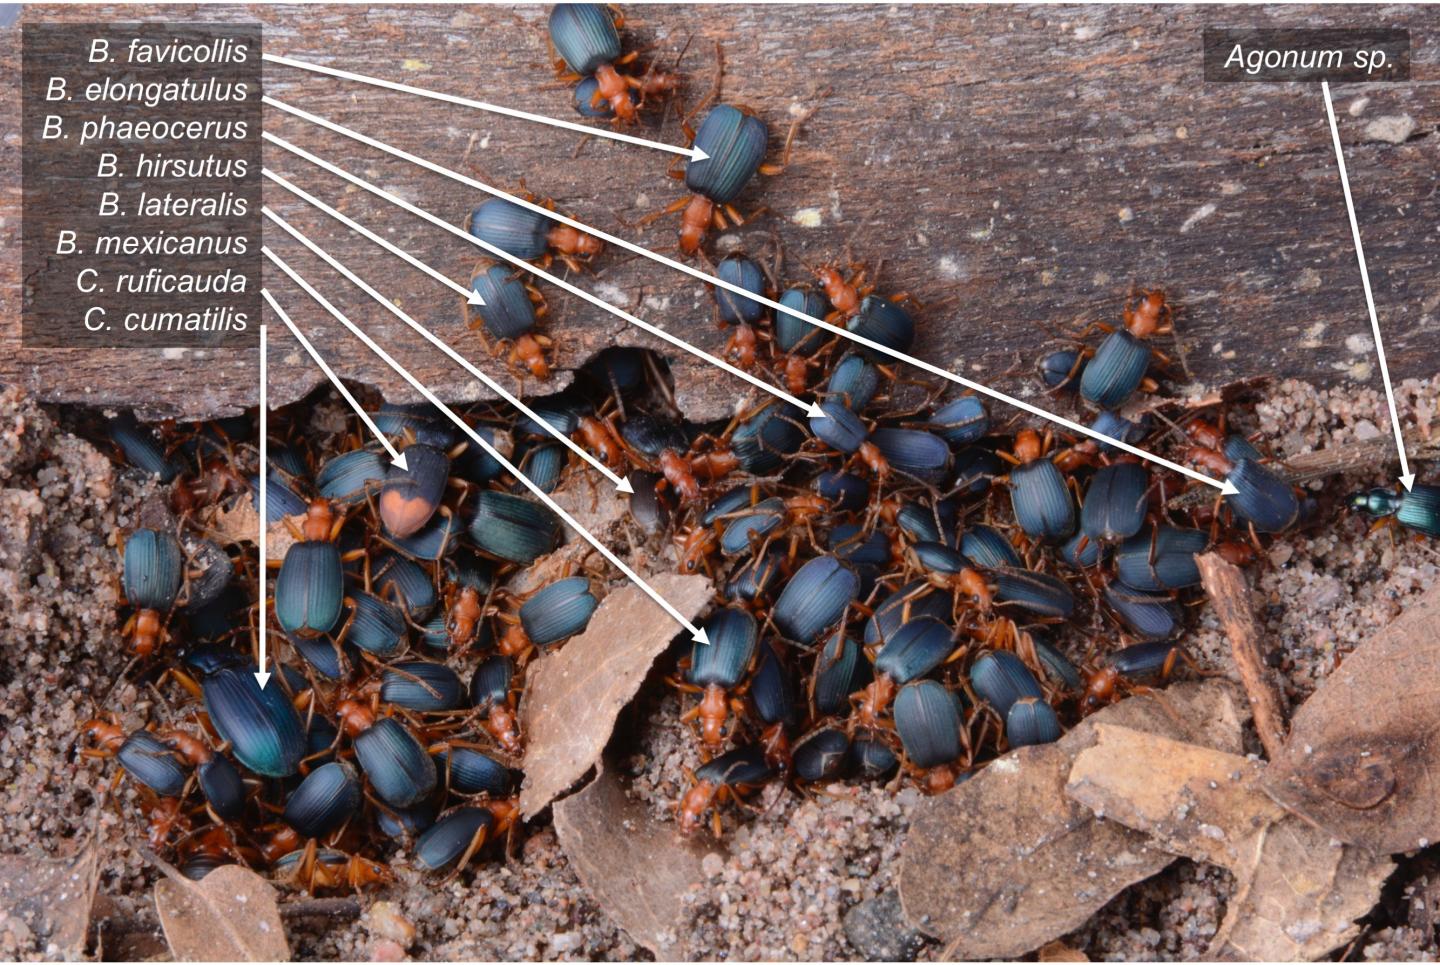 Ballistic Beetles Seek Safety in Numbers by Sheltering with Other Species